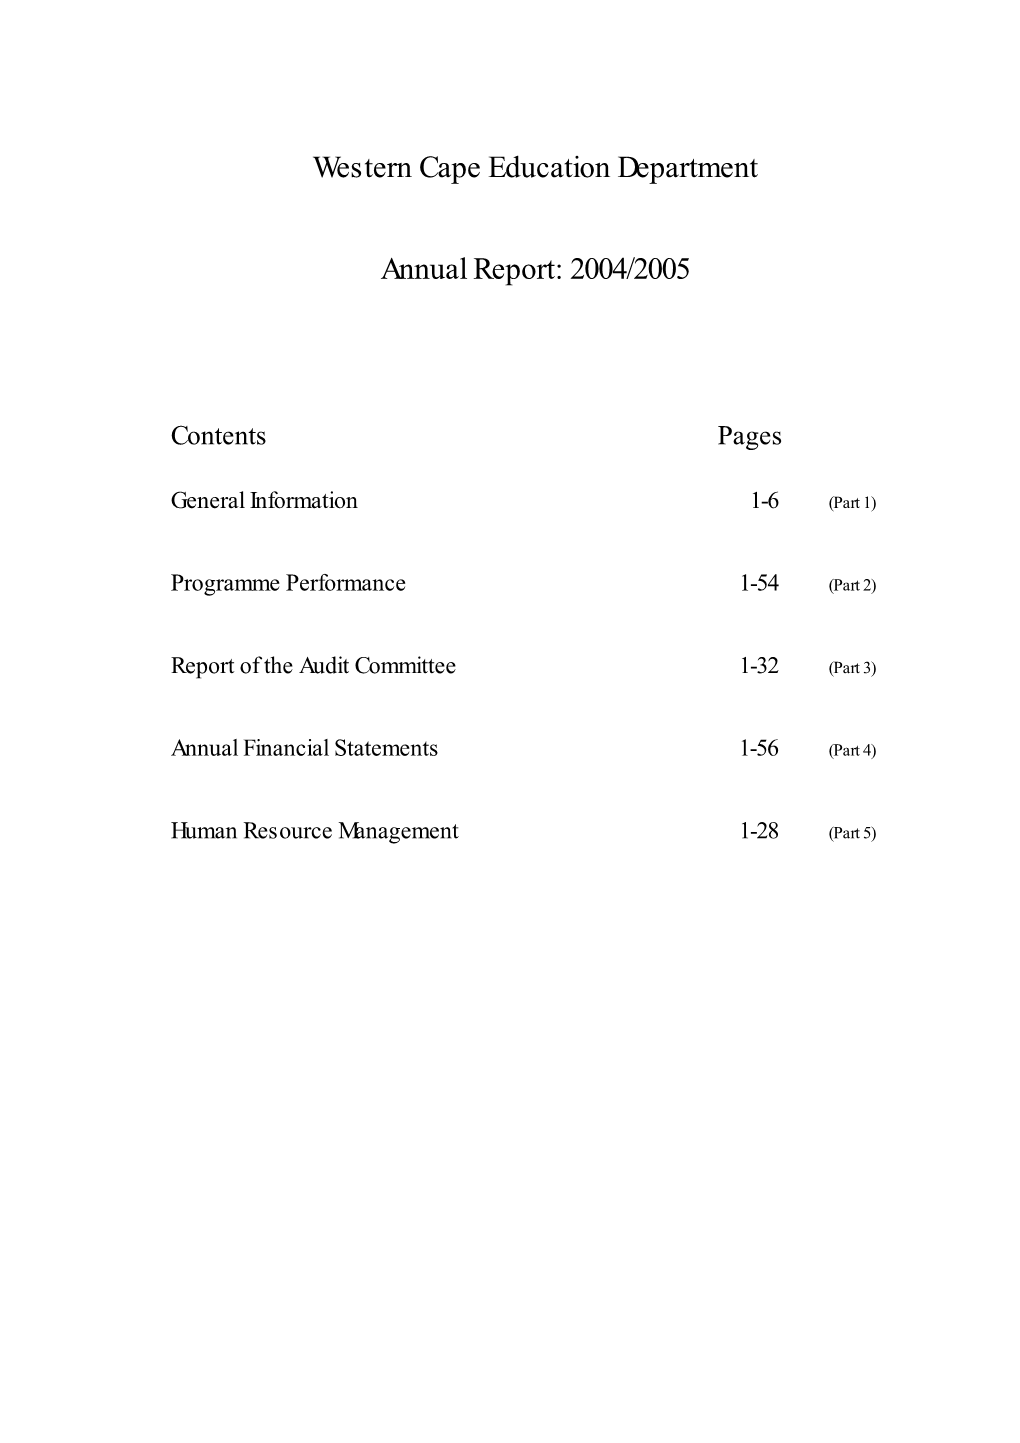 Western Cape Education Department Annual Report: 2004/2005